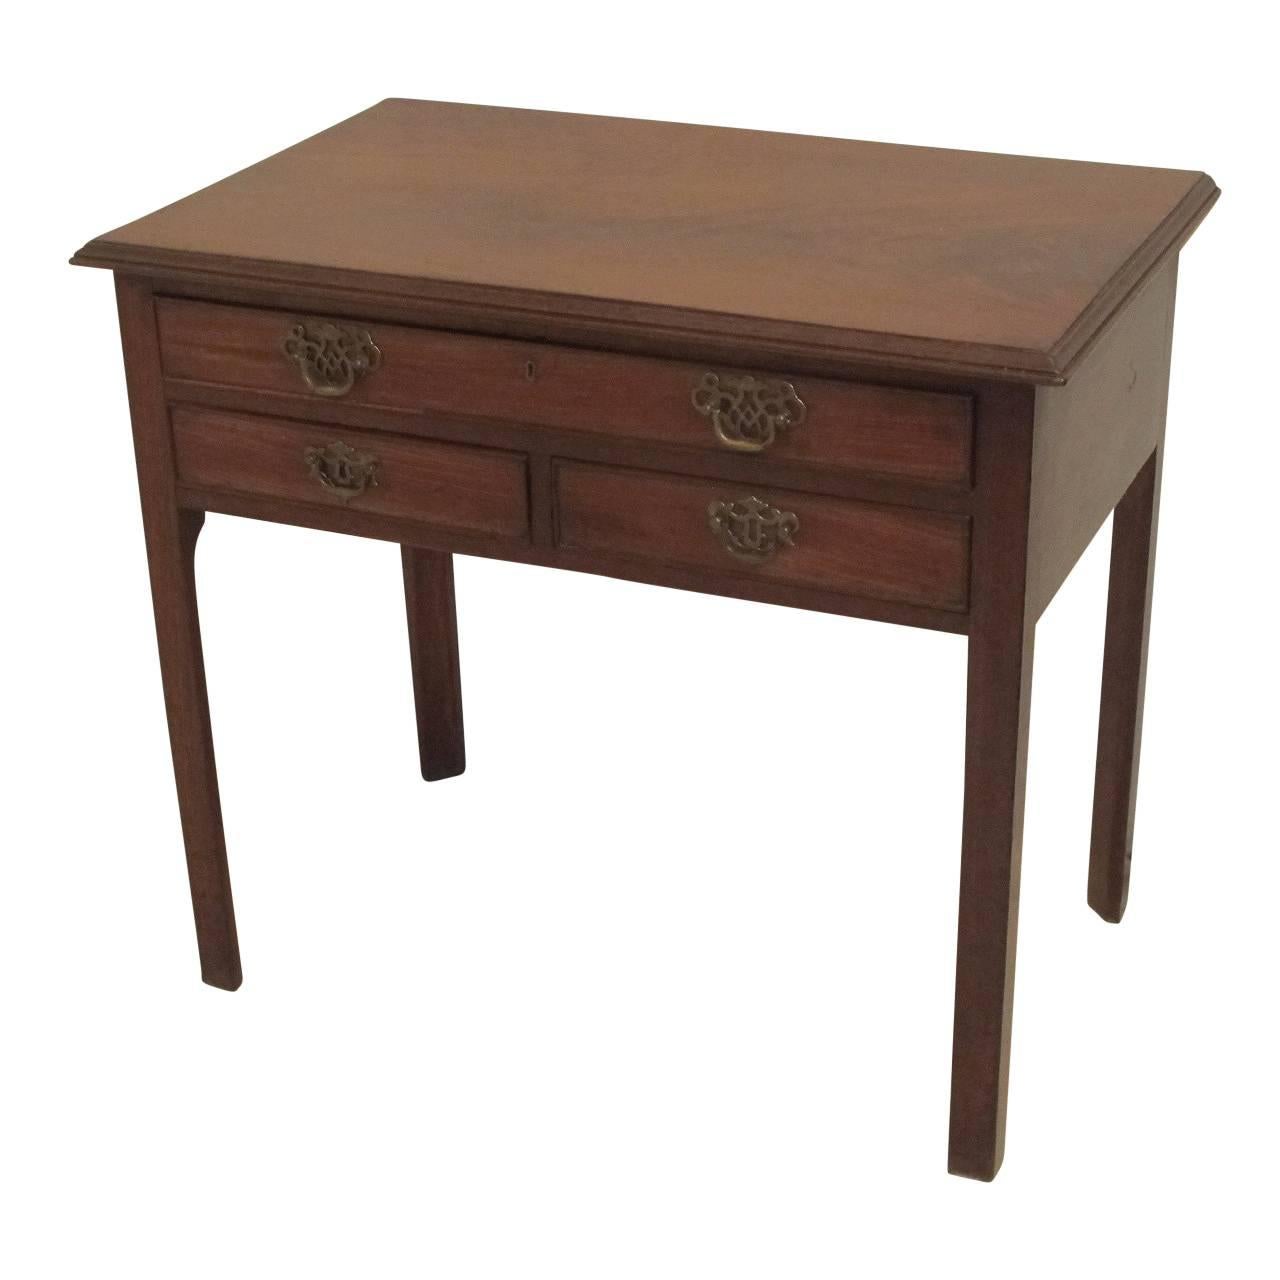 Three-drawer mahogany side table having a single long drawer over two short drawers standing on square legs with canted inside, England, circa 1820.